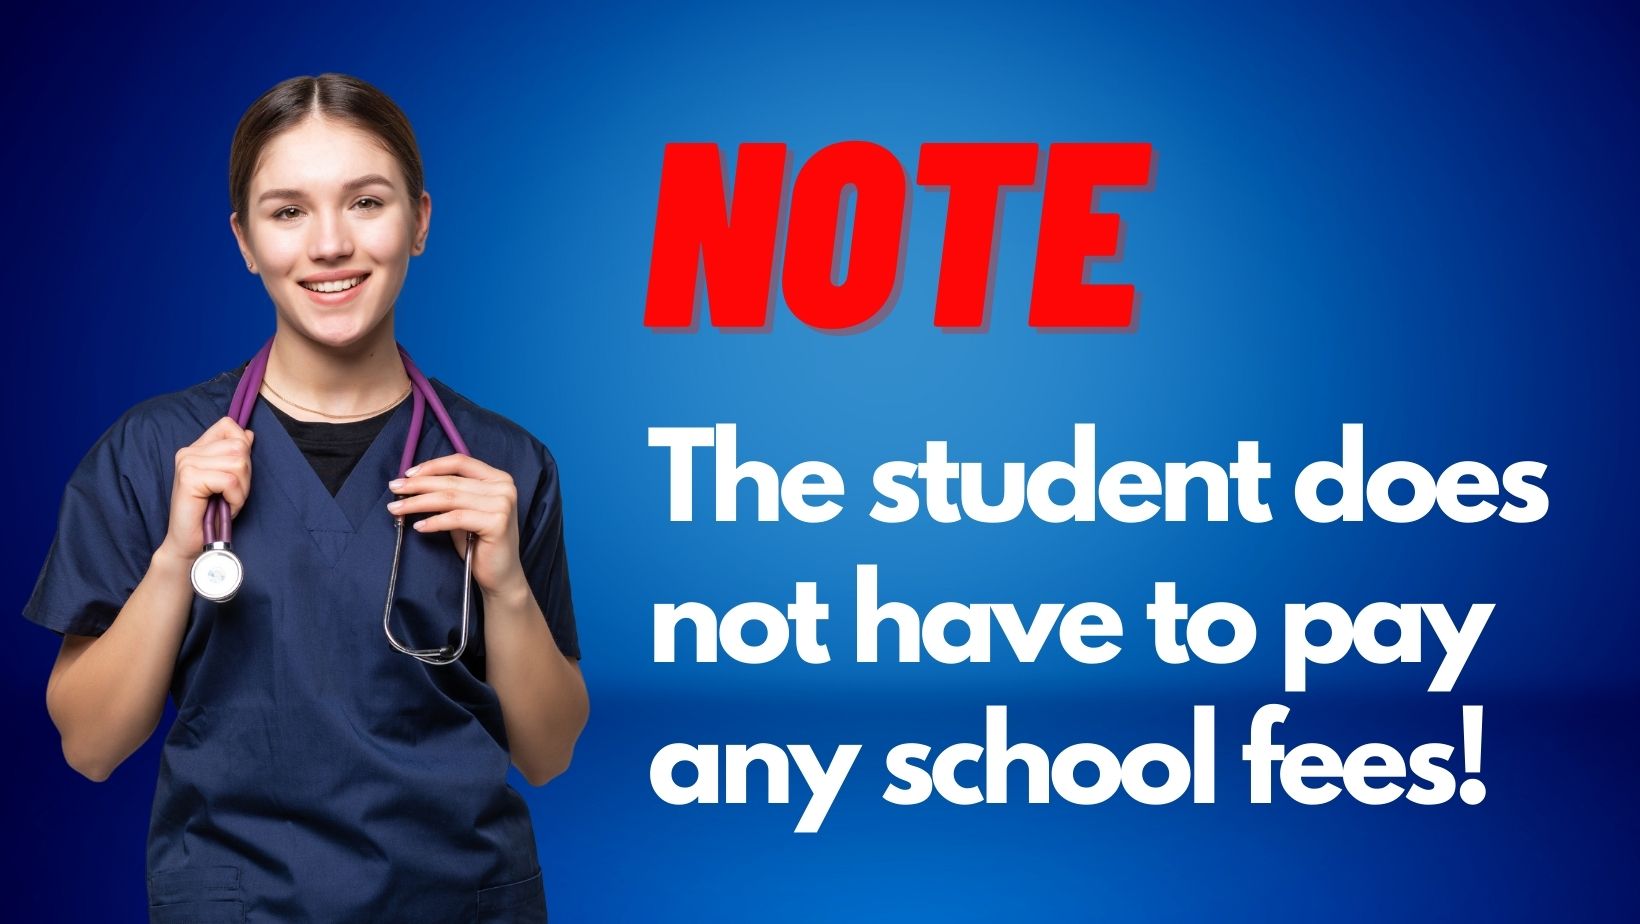 The student does not have to pay any school fees!